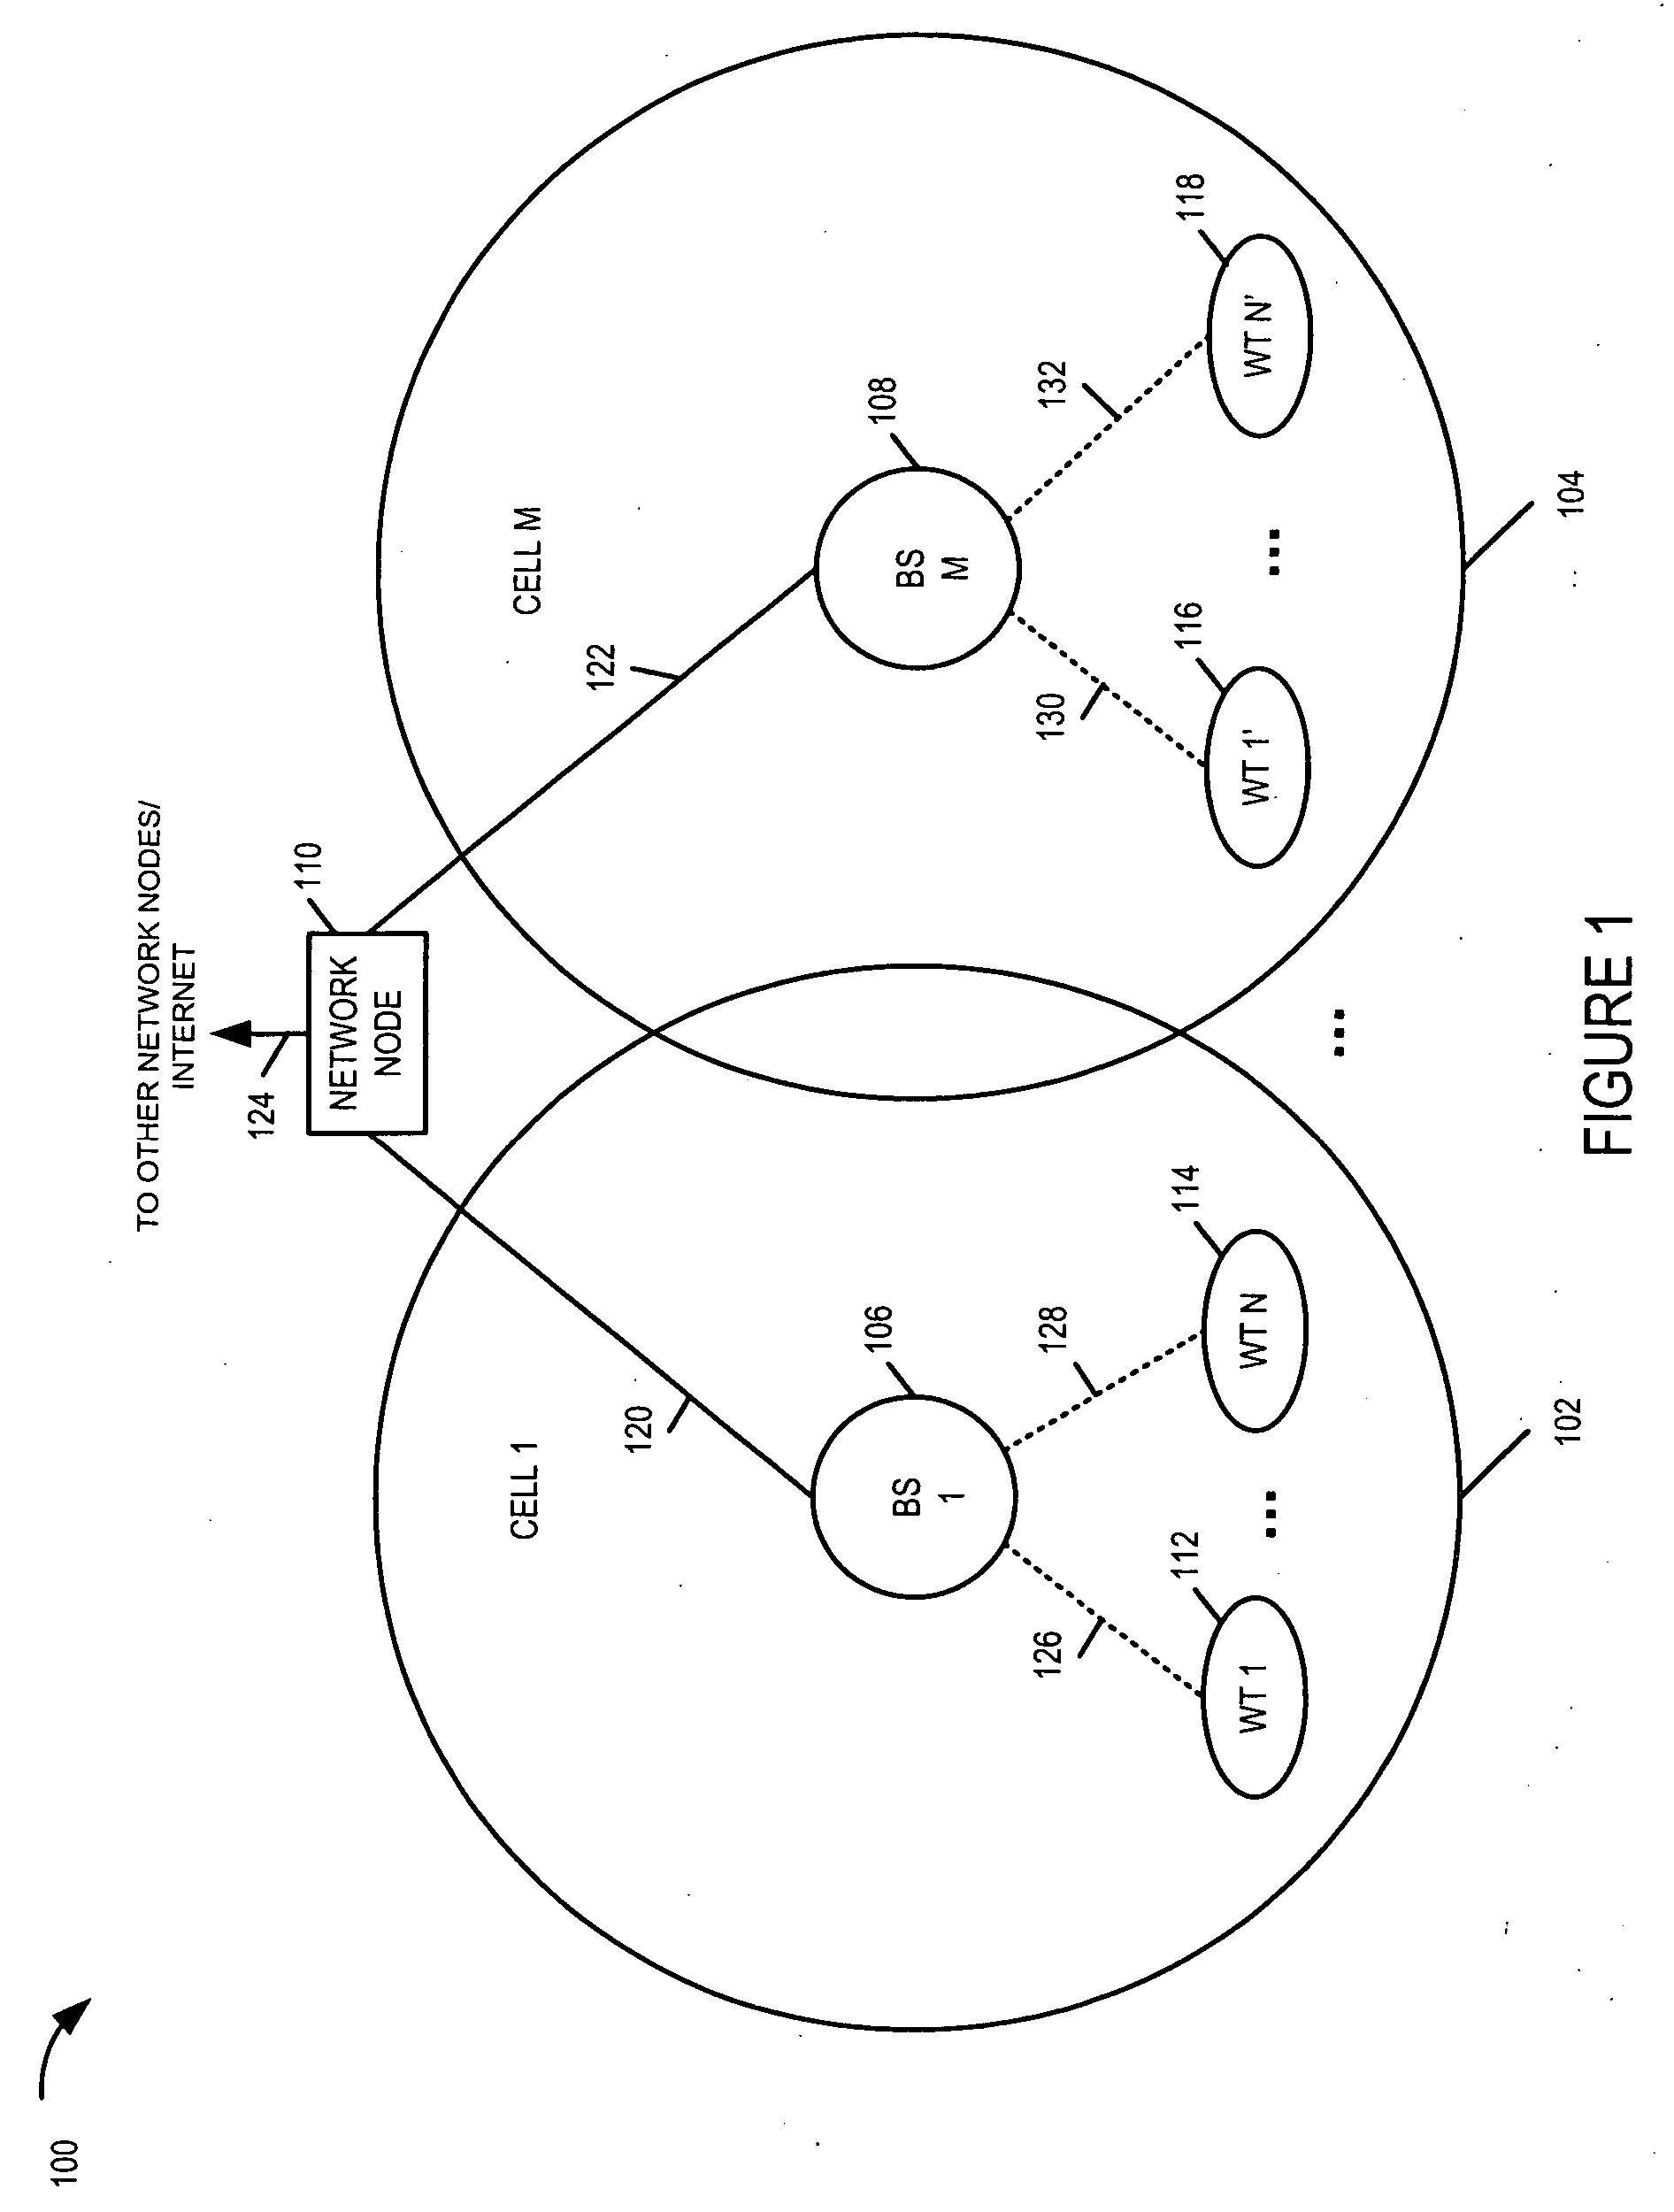 Wireless terminal methods and apparatus for use in a wireless communications system that uses a multi-mode base station